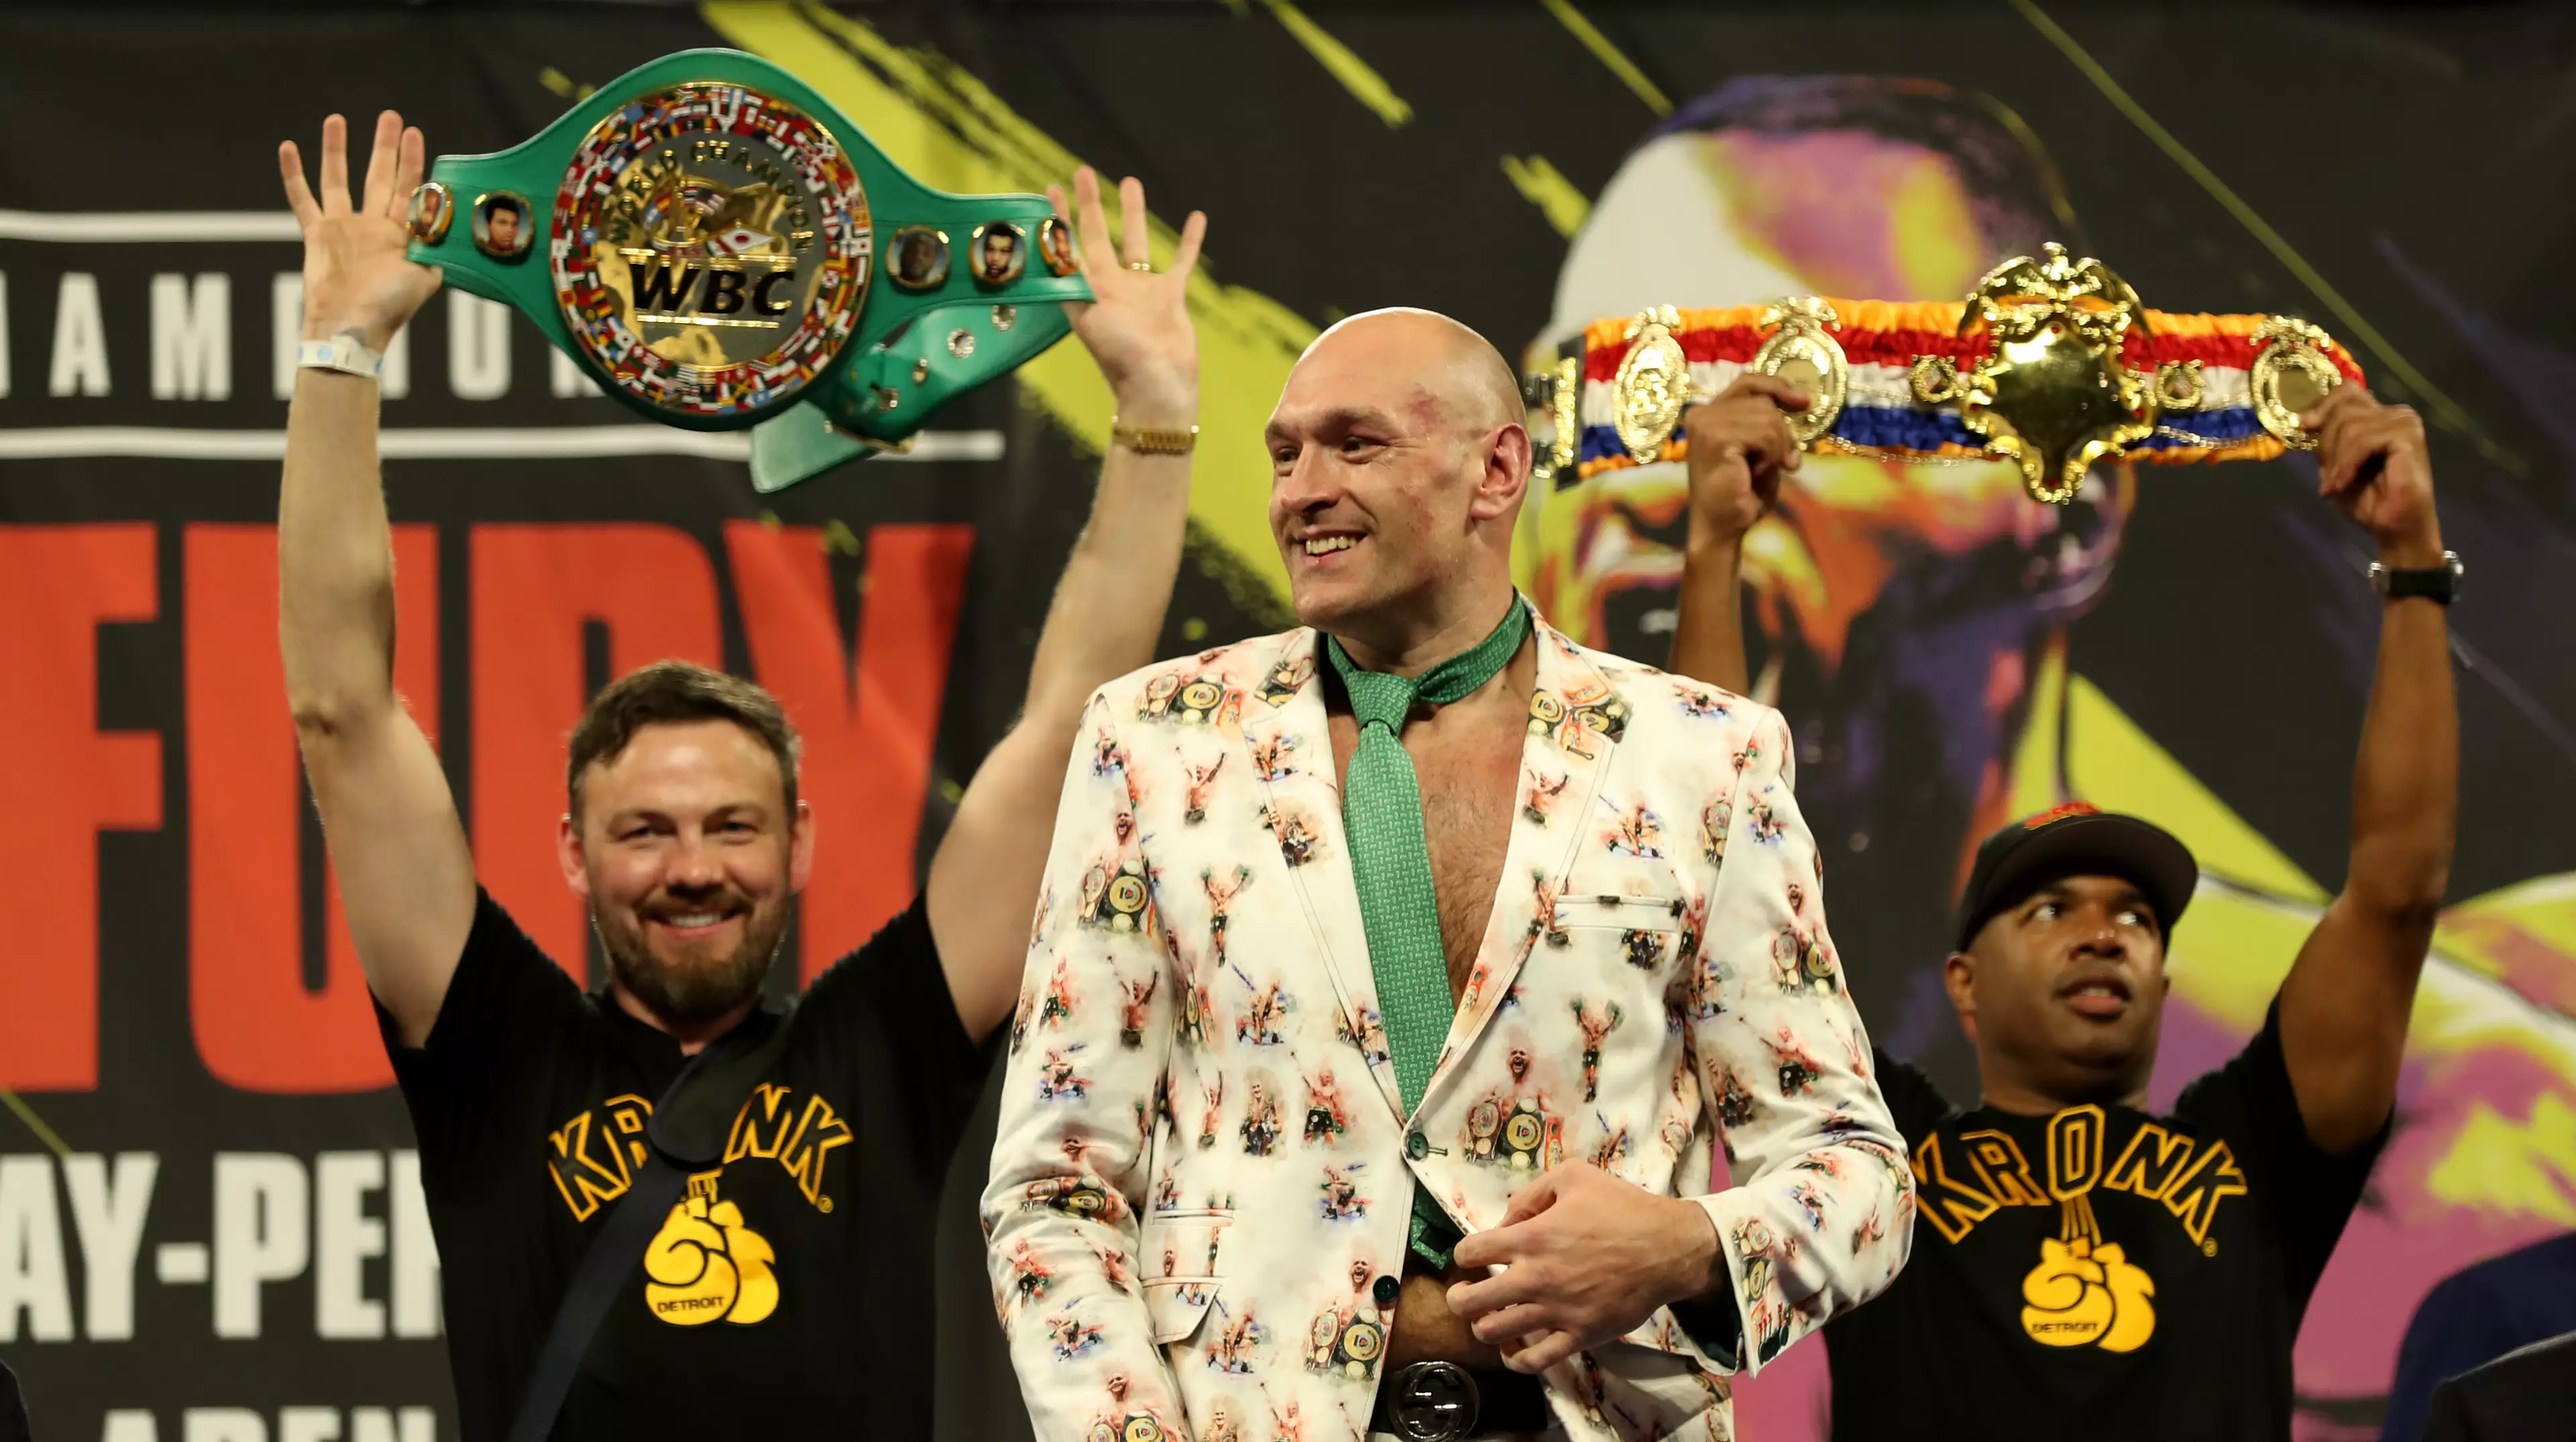 Fury after last night's victory over Deontay Wilder. (Image